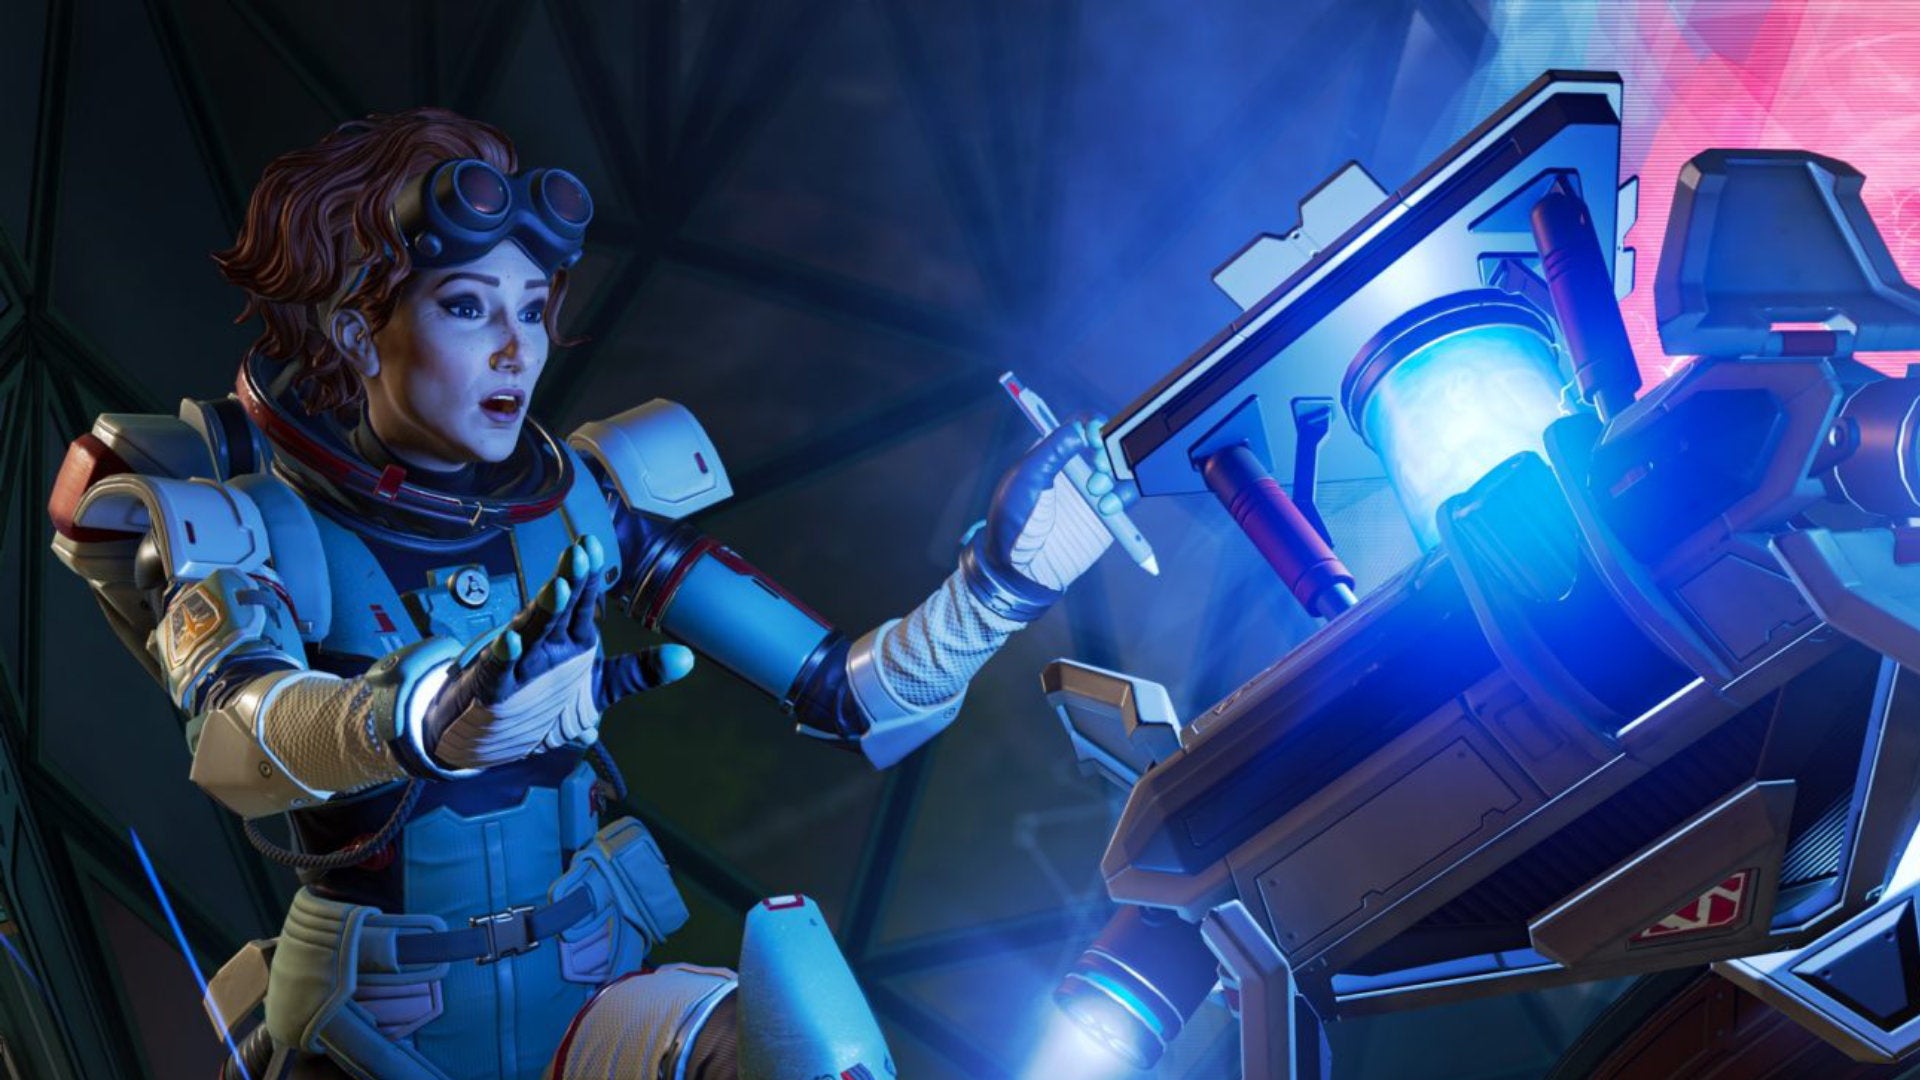 A close-up of Horizon, an Apex Legends character, using one of her abilities.